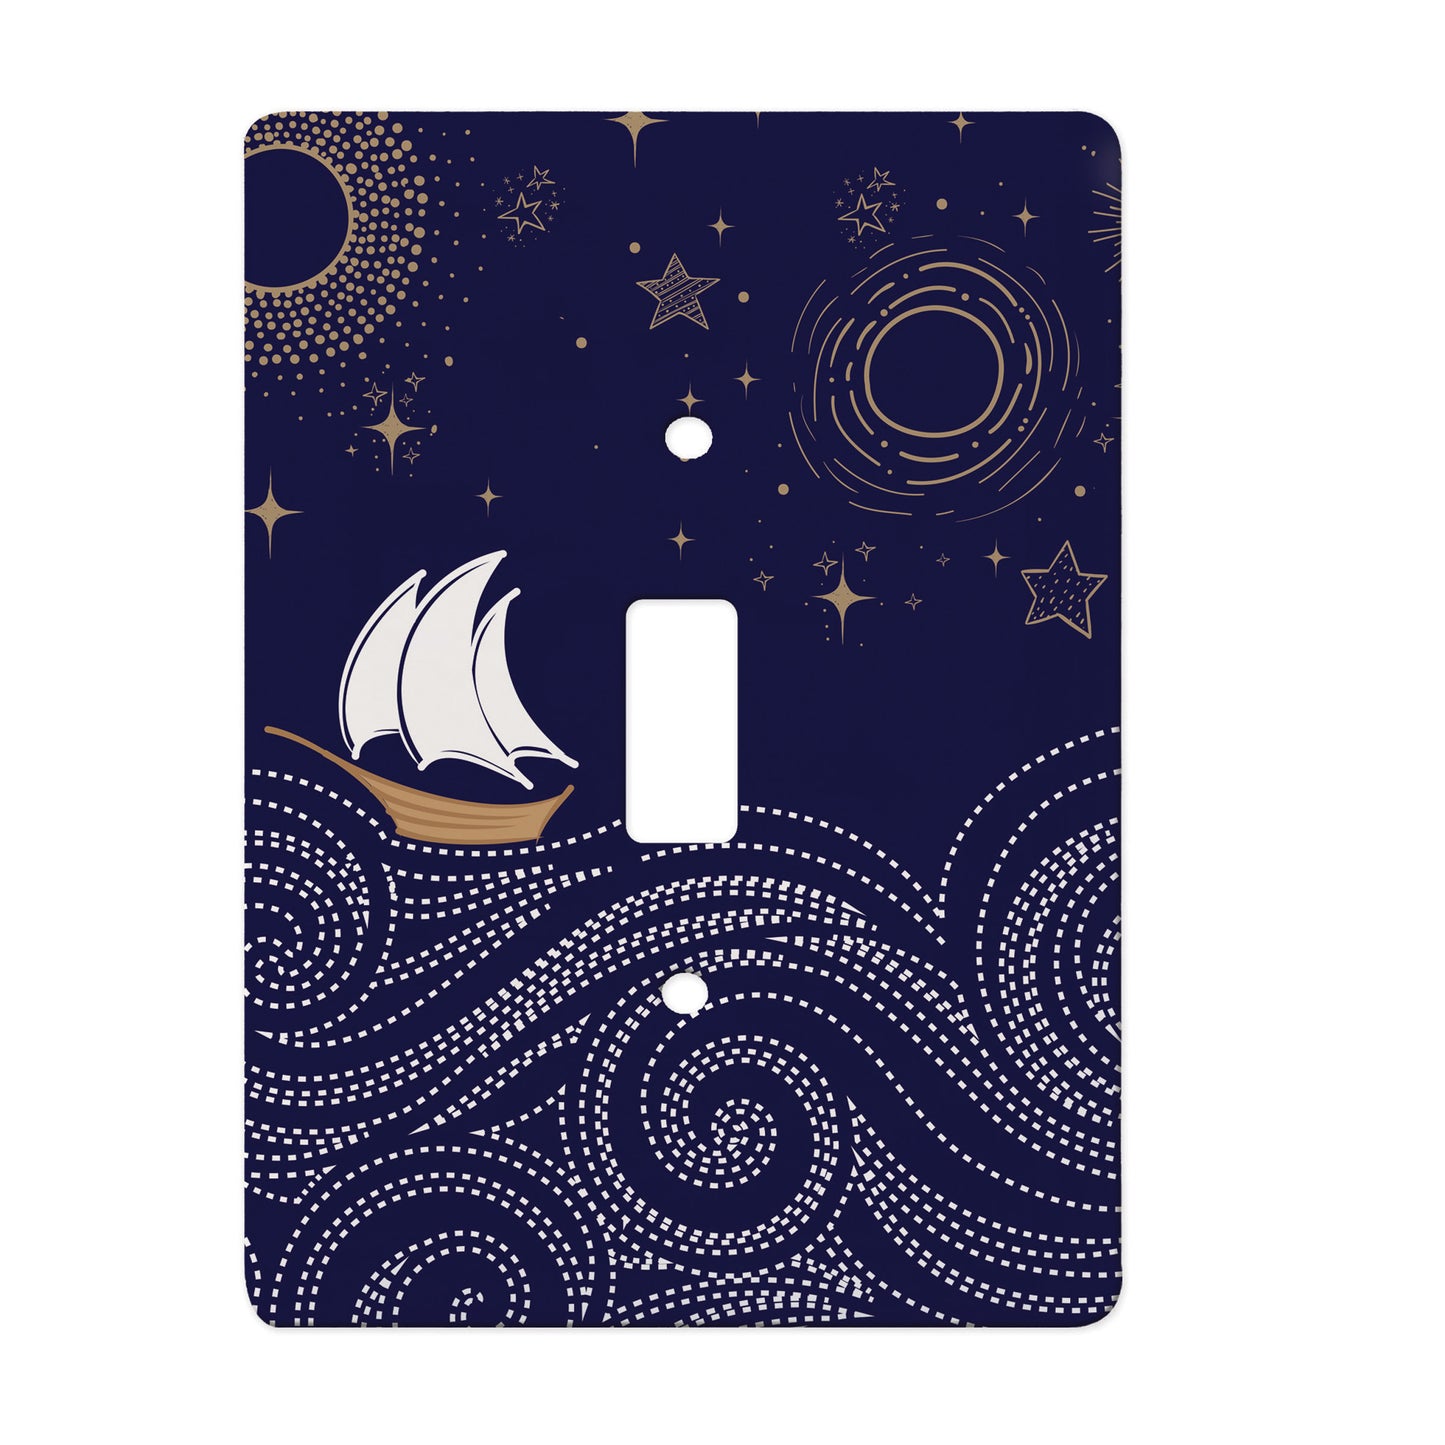 navy ceramic single toggle switch plate featuring a graphic of a ship on a rolling sea with gold stars above.